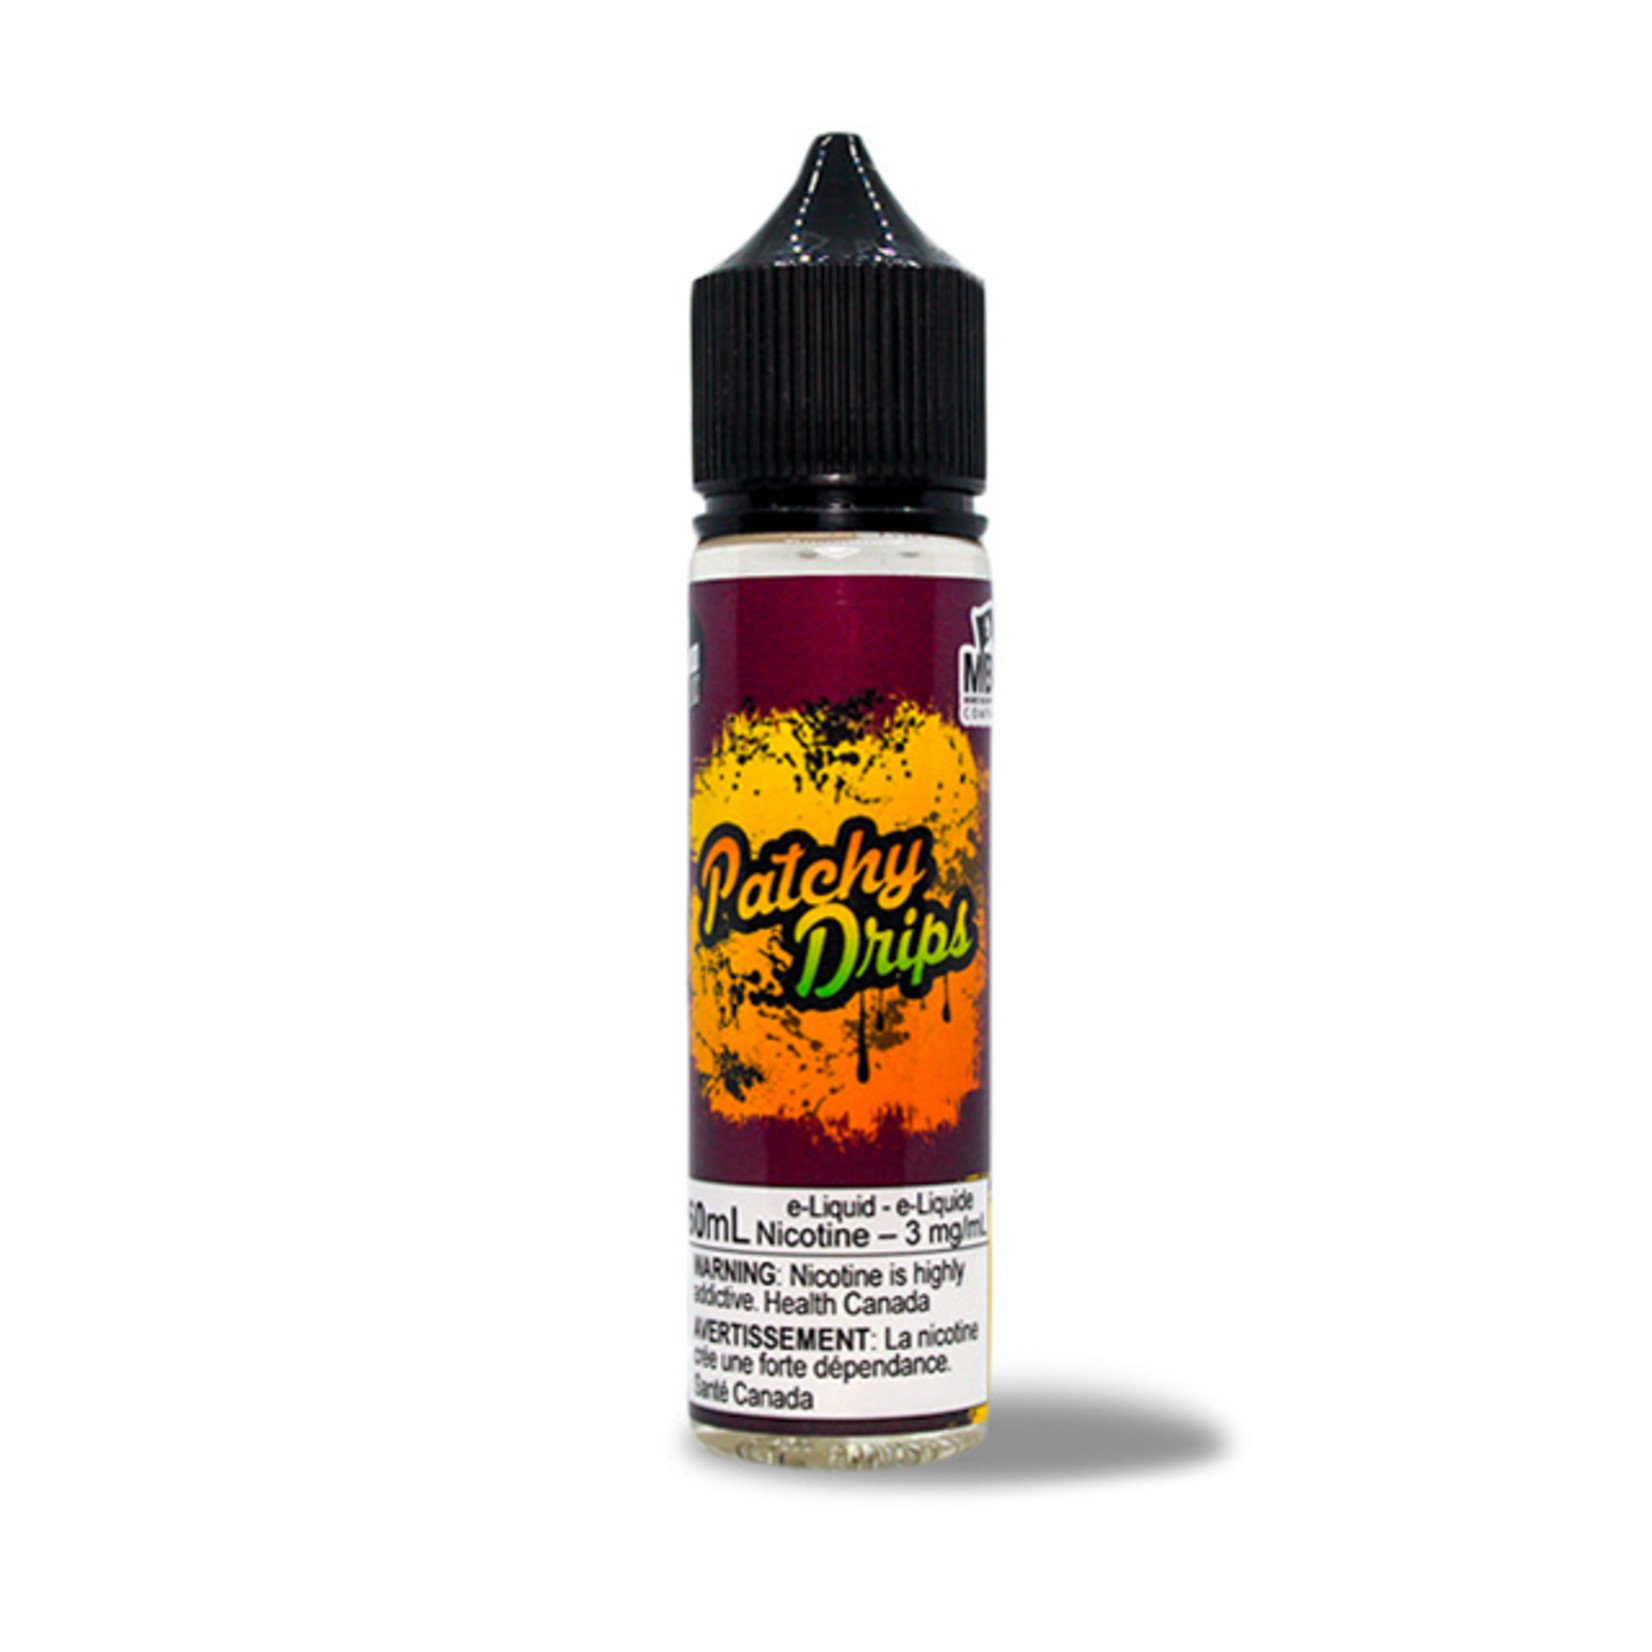 Mind Blown Vape Co- Patchy Drips